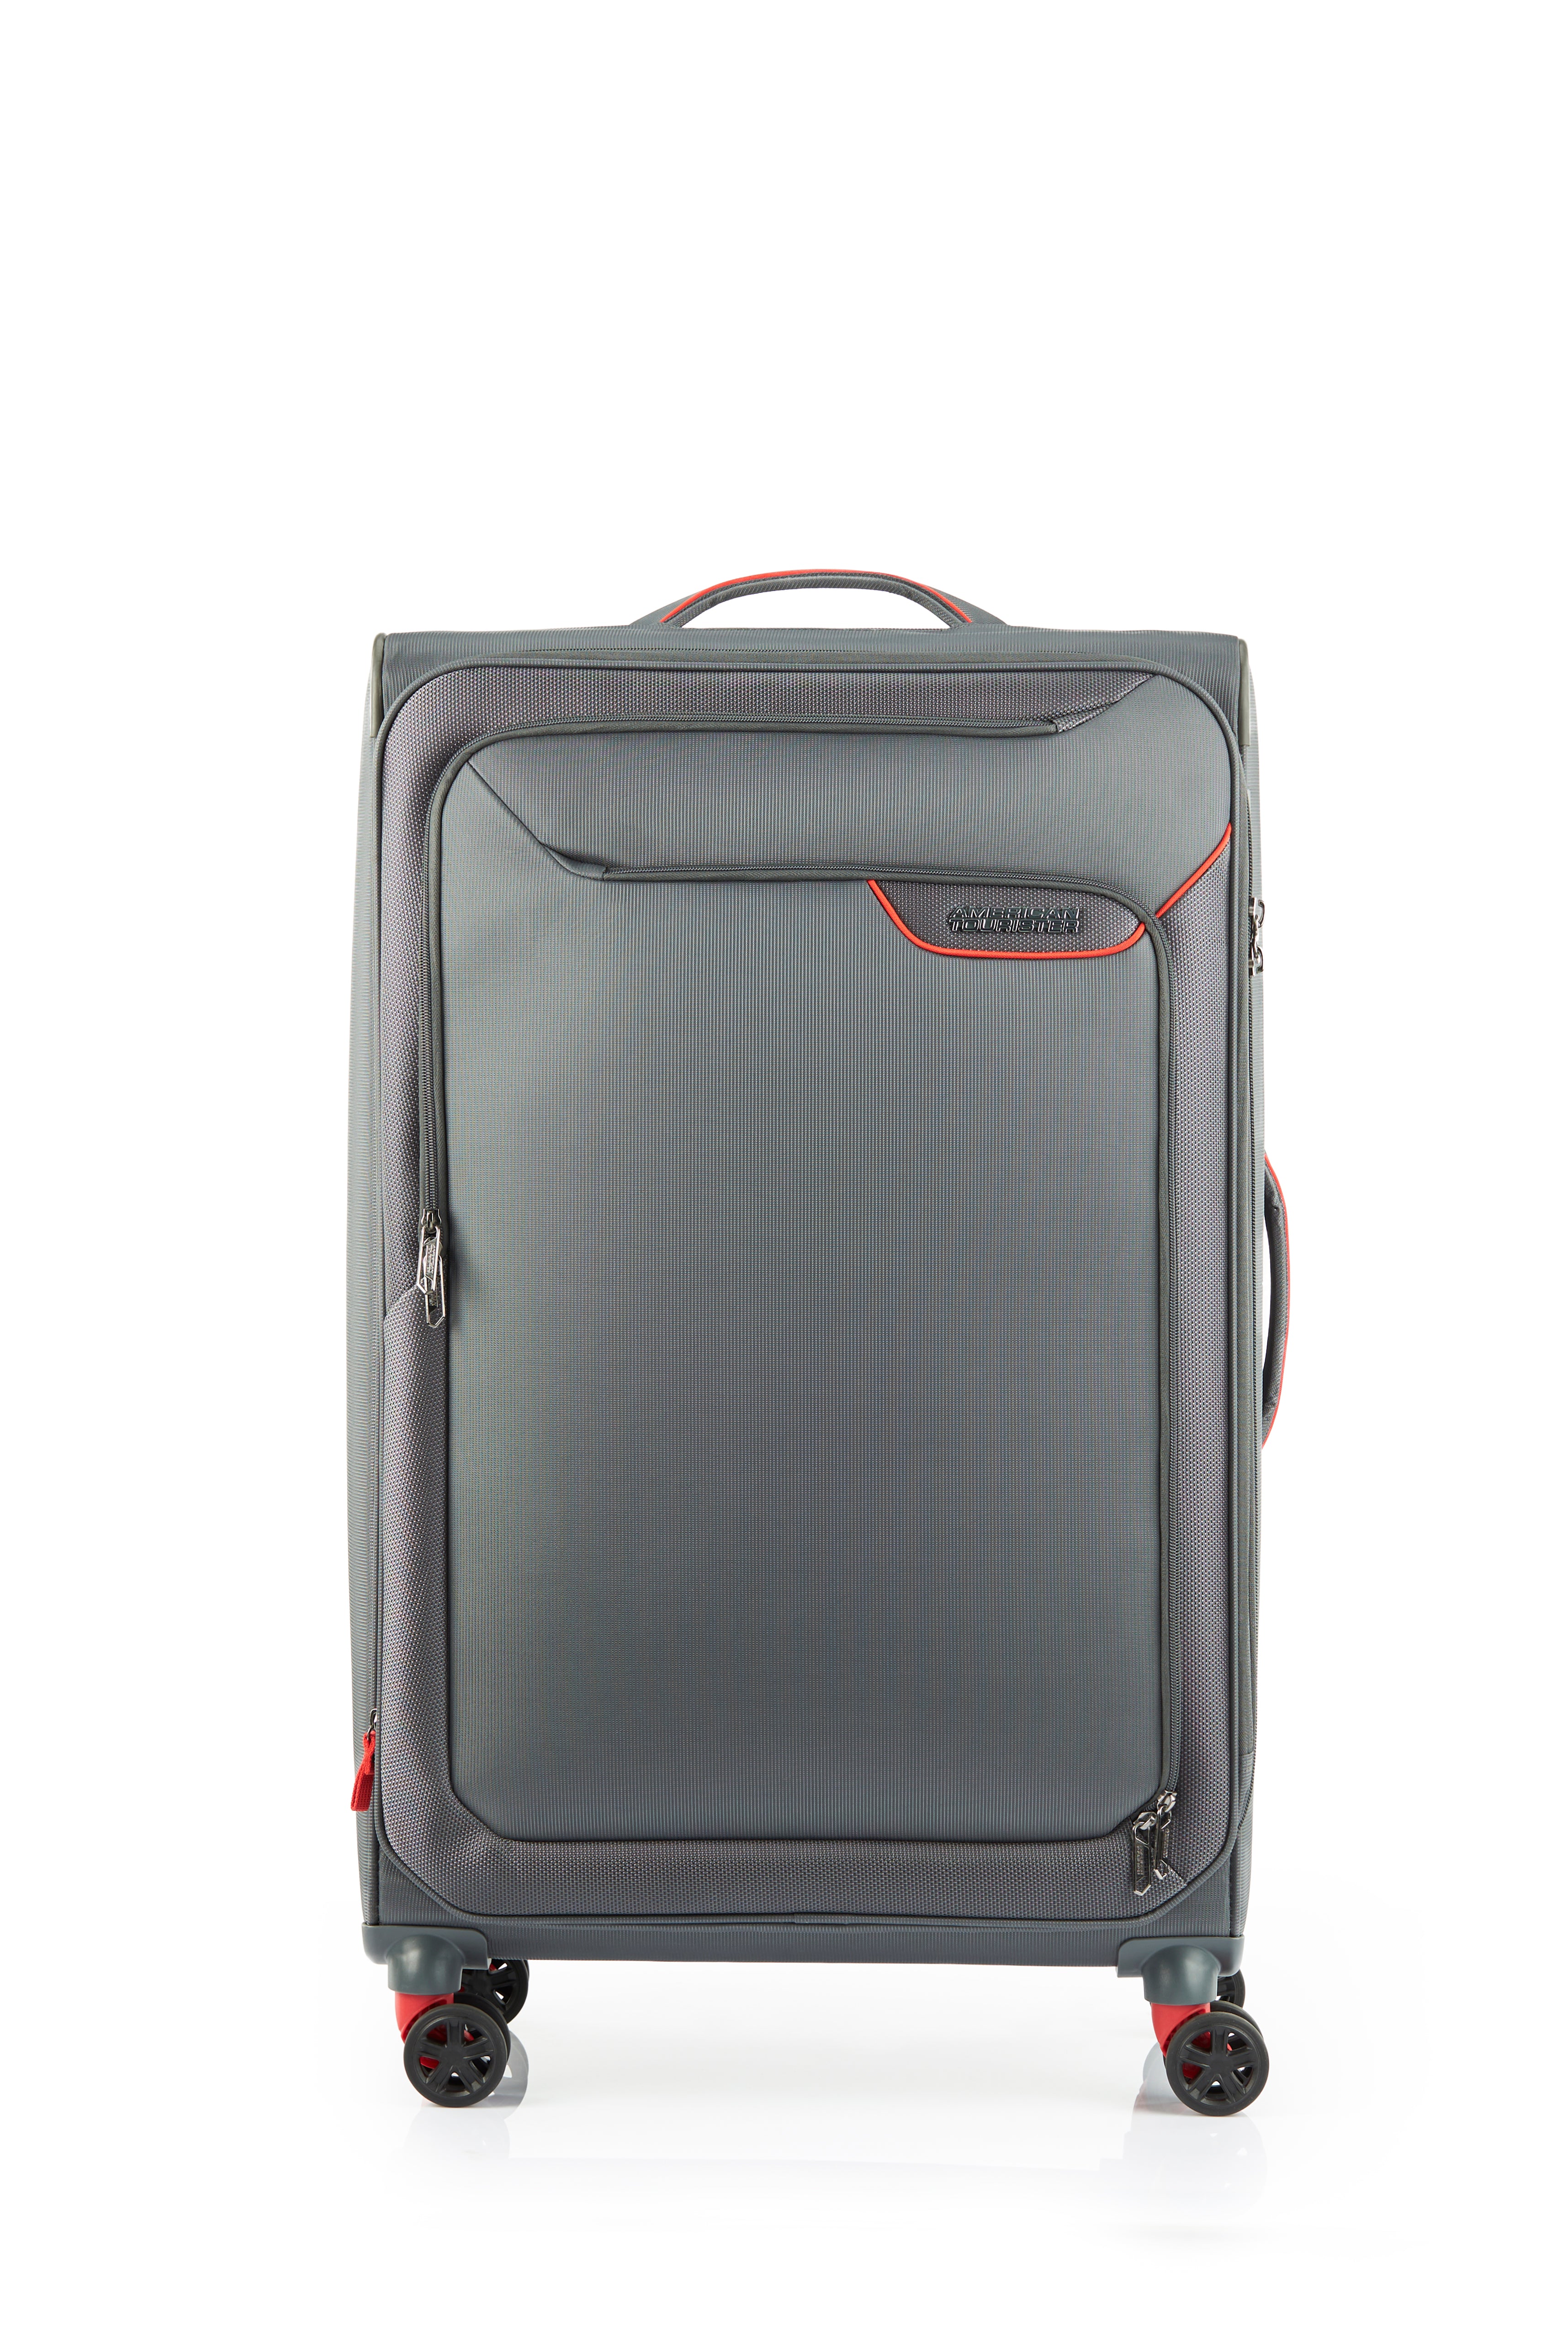 American Tourister - Applite ECO 82cm Large Suitcase - Grey/Red - 0